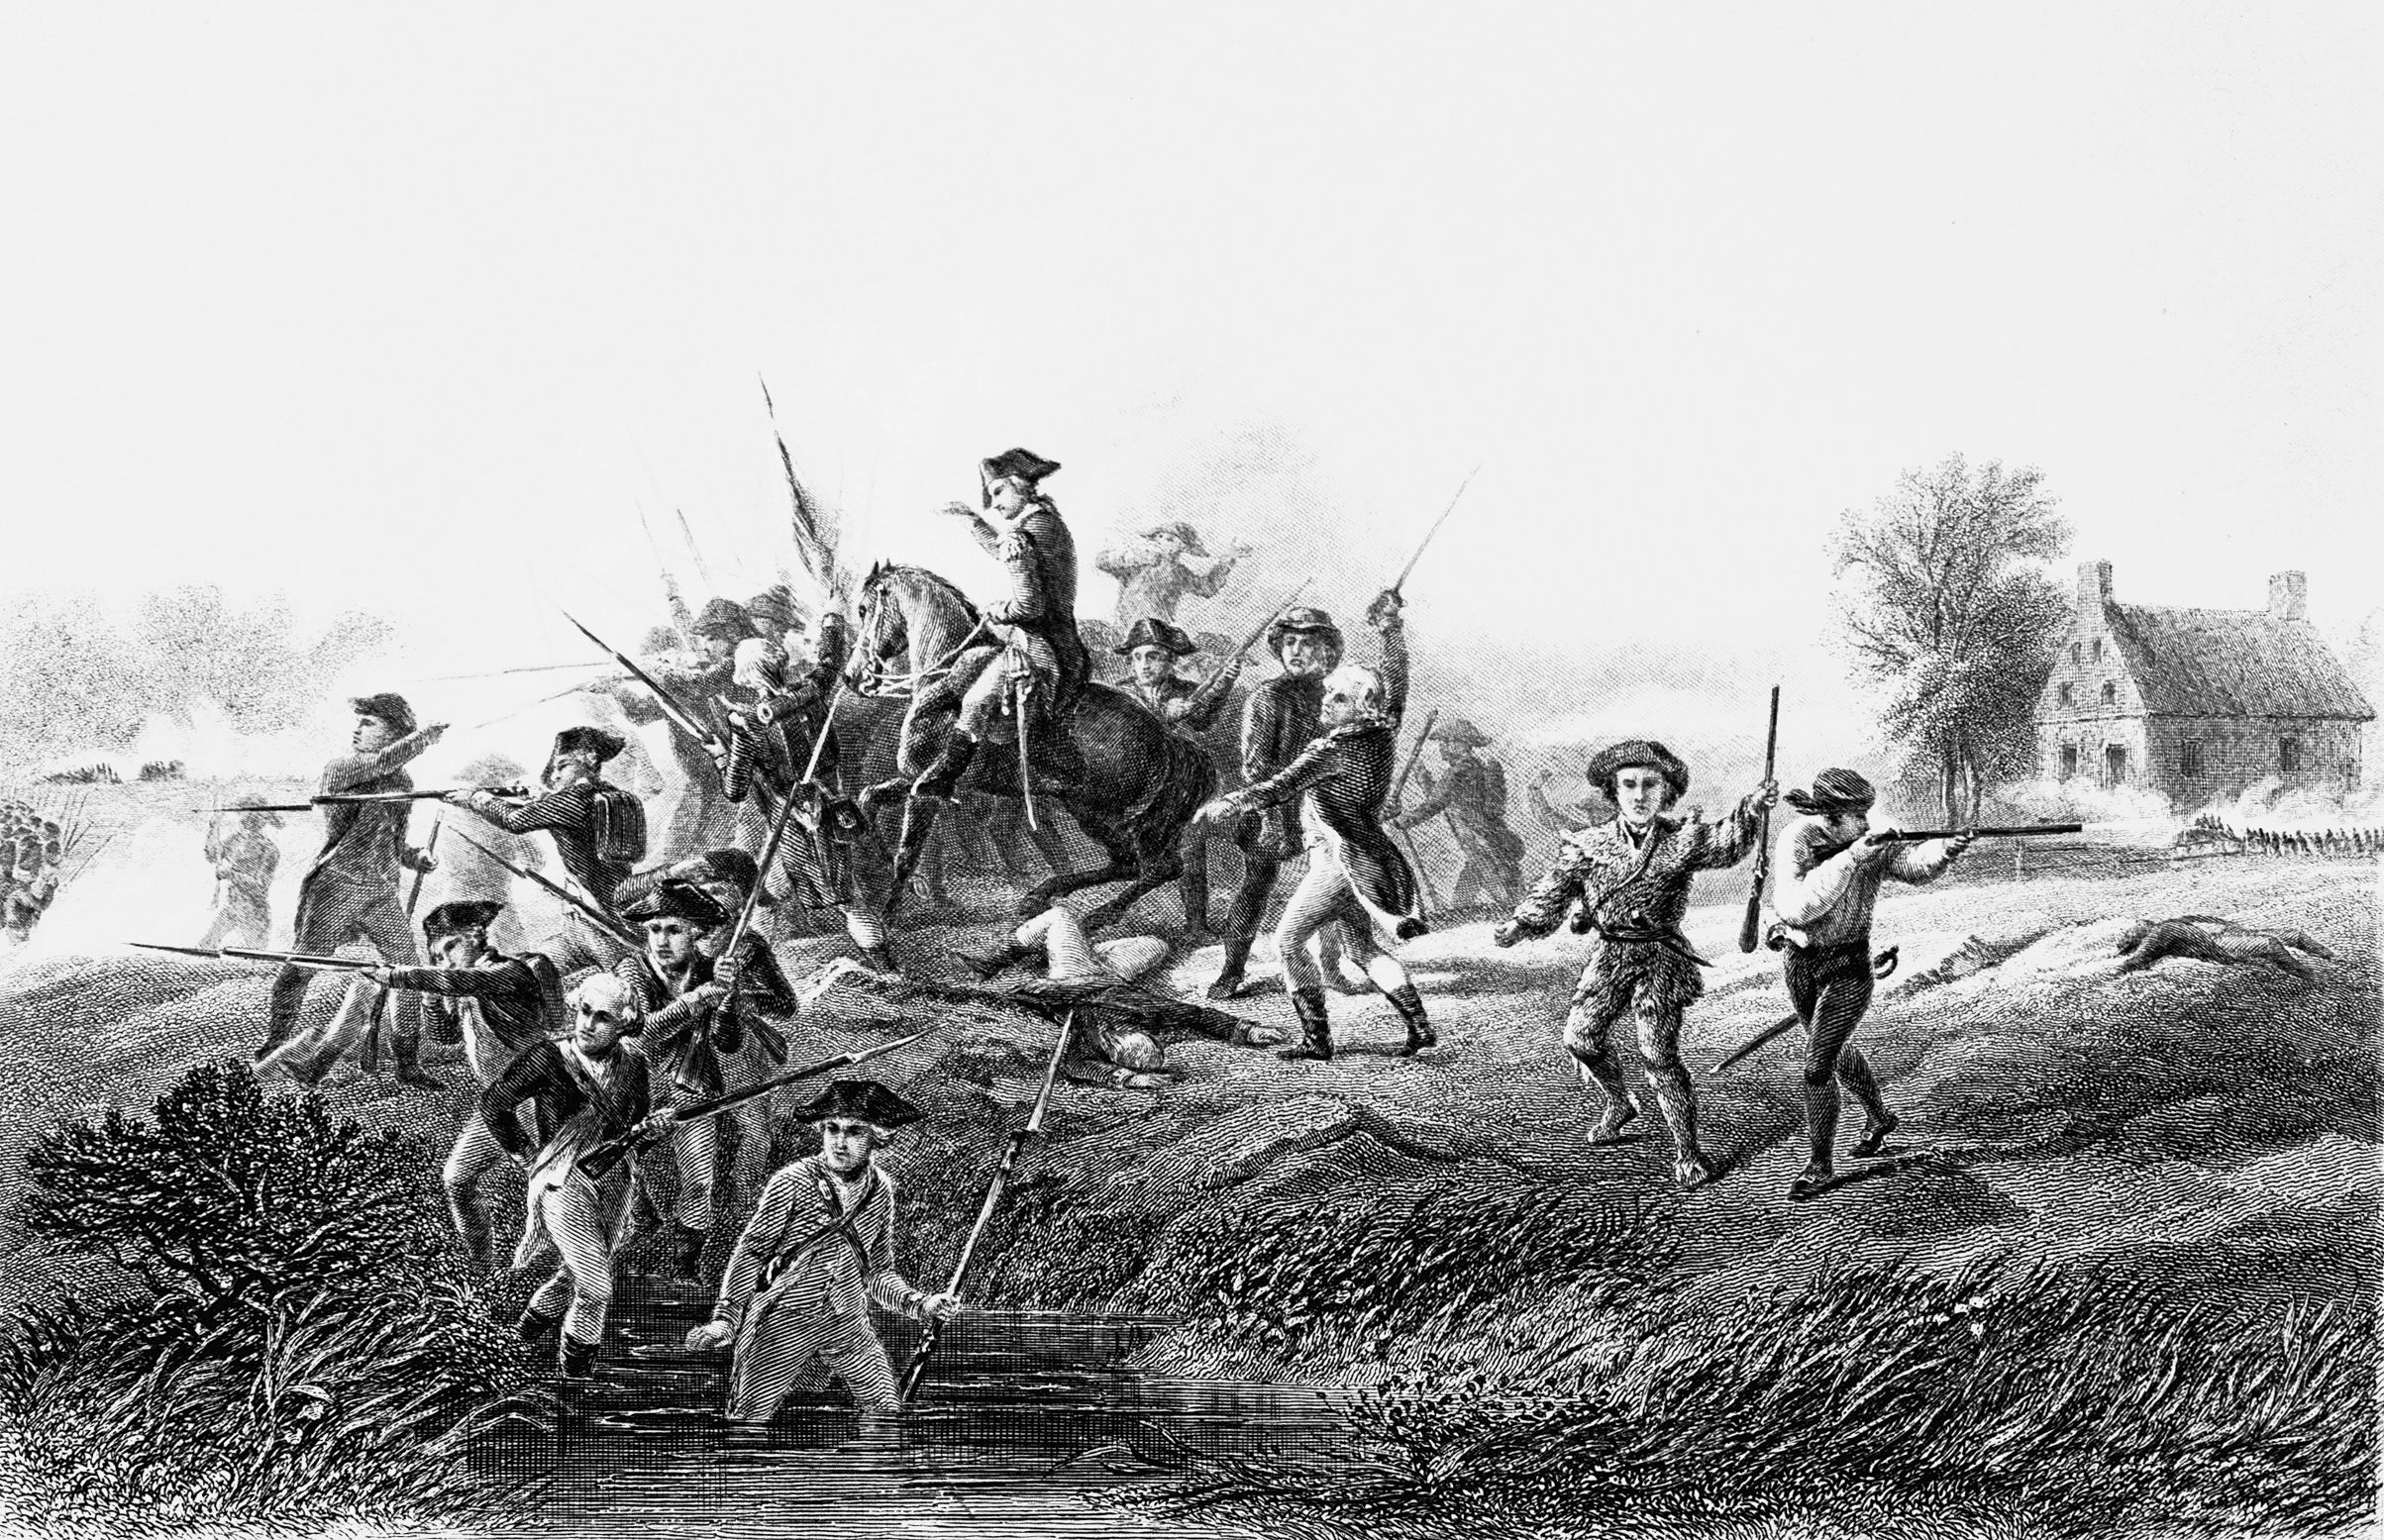 Stirling joins the rear guard of 250 Marylanders confronting 10,000 British and Hessian troops on Long Island. Stirling was captured and later exchanged.